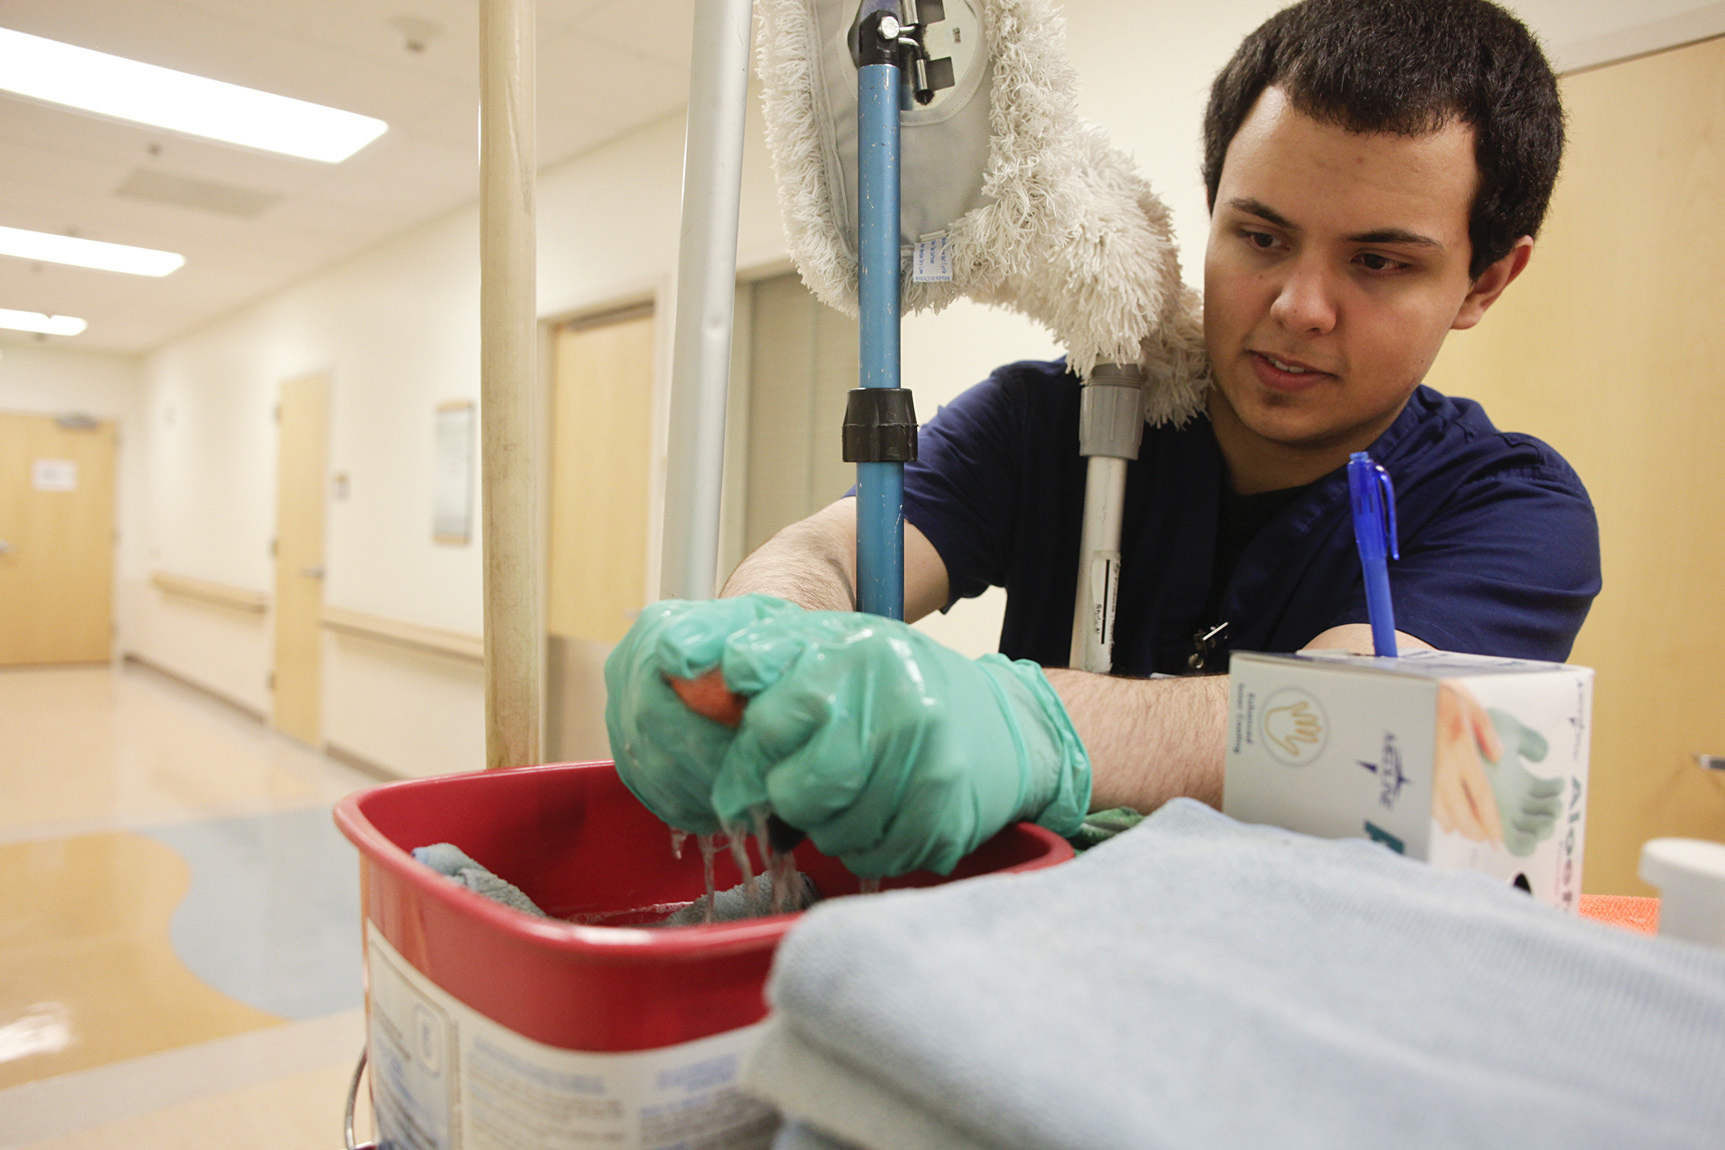 Vincent “Vin” Chavarrir prepares to clean a patient’s room at Central Peninsula Hospital in Soldotna. Chavarrir is an intern with Project SEARCH.